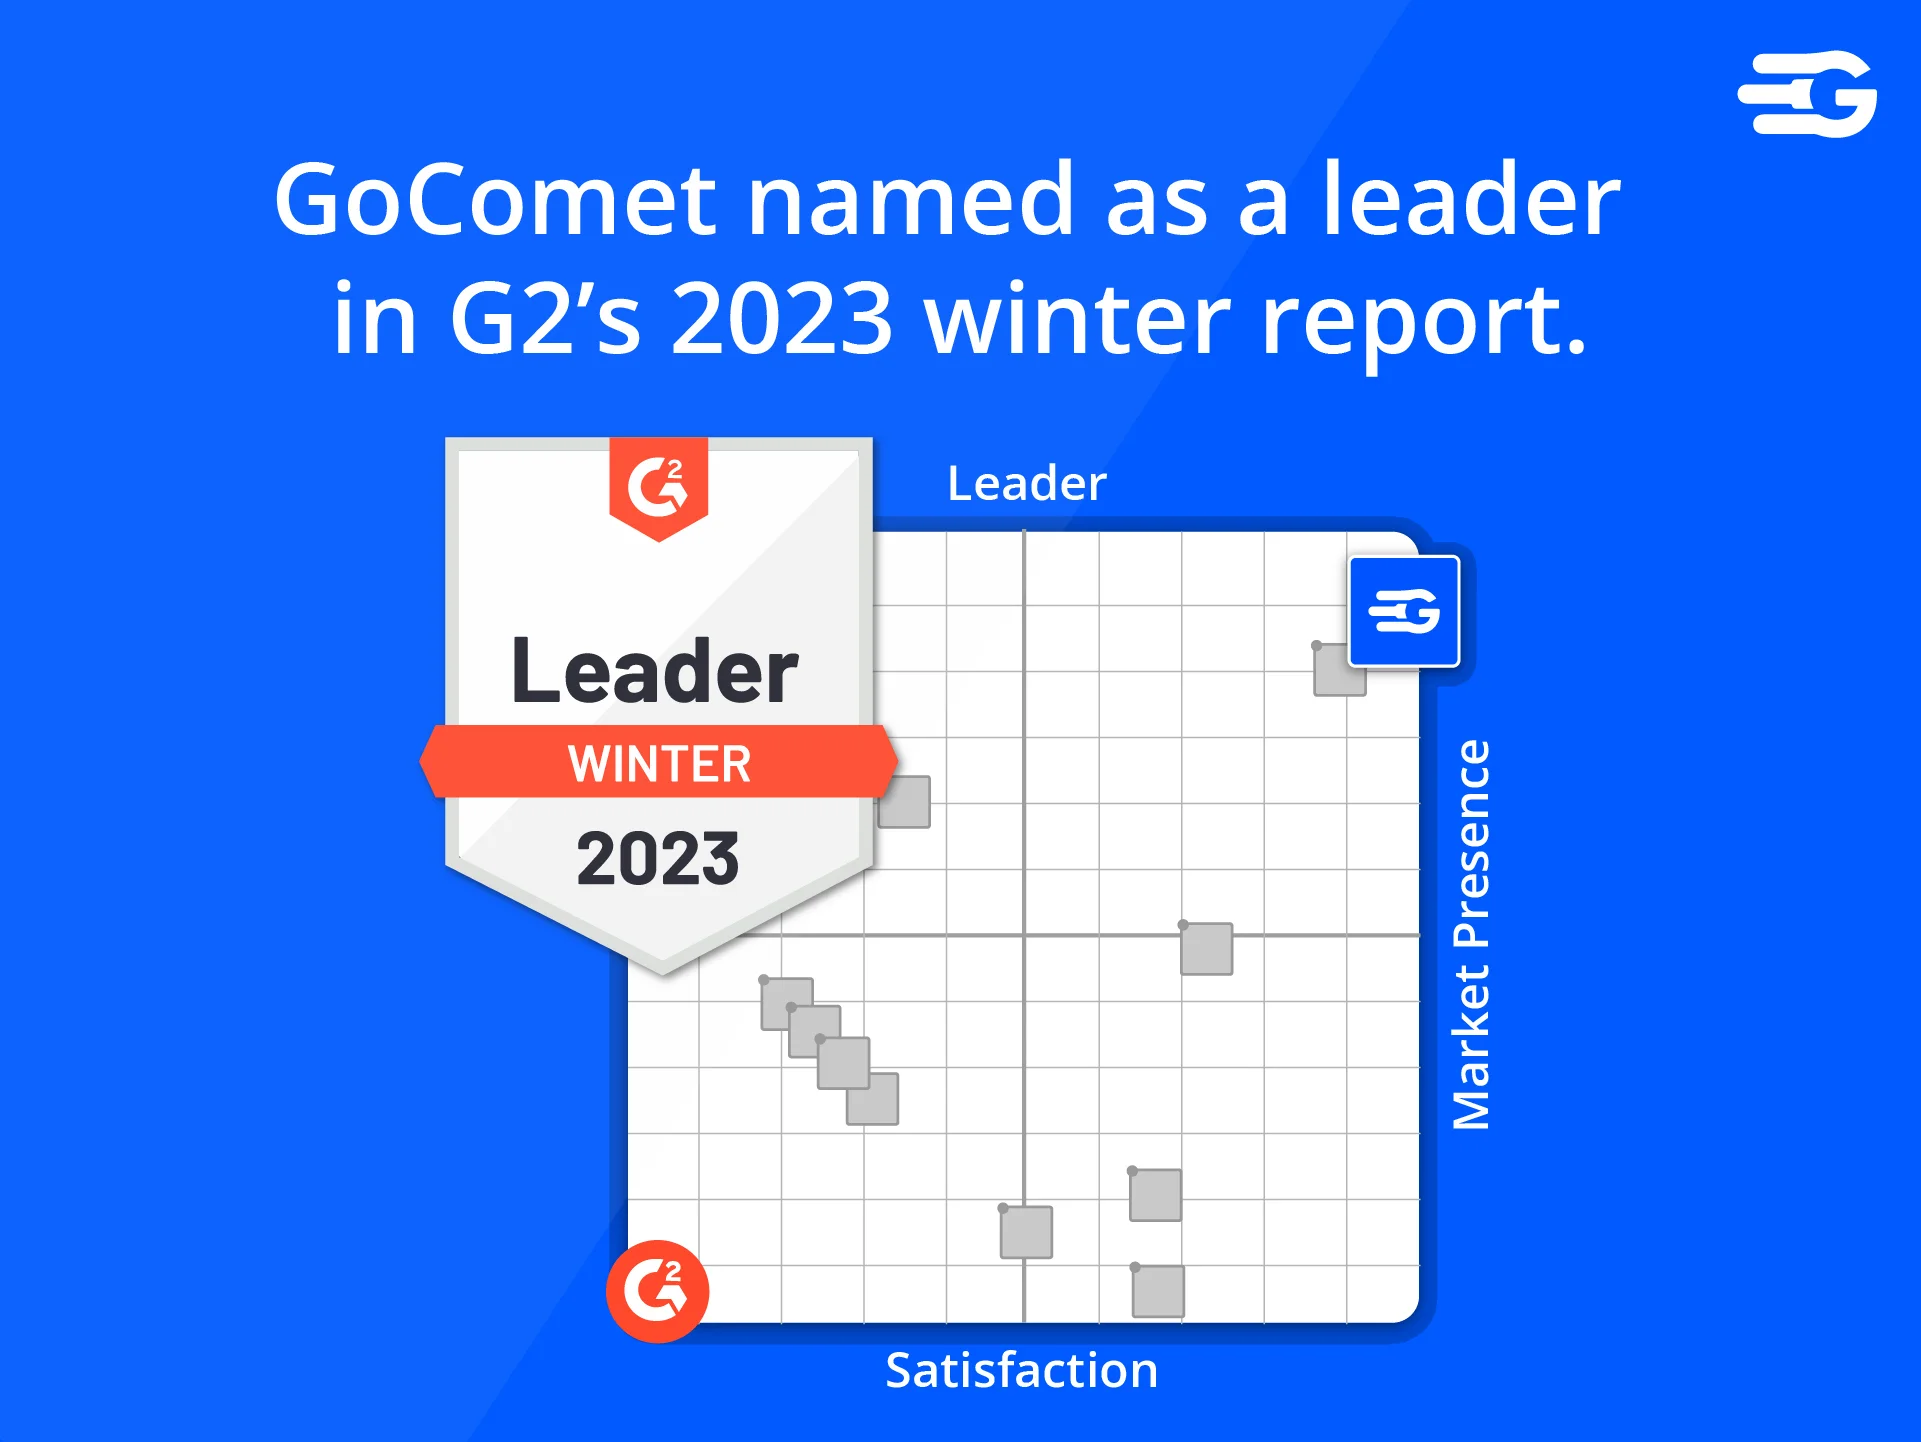 GoComet named as a leader in supply chain visibility by G2